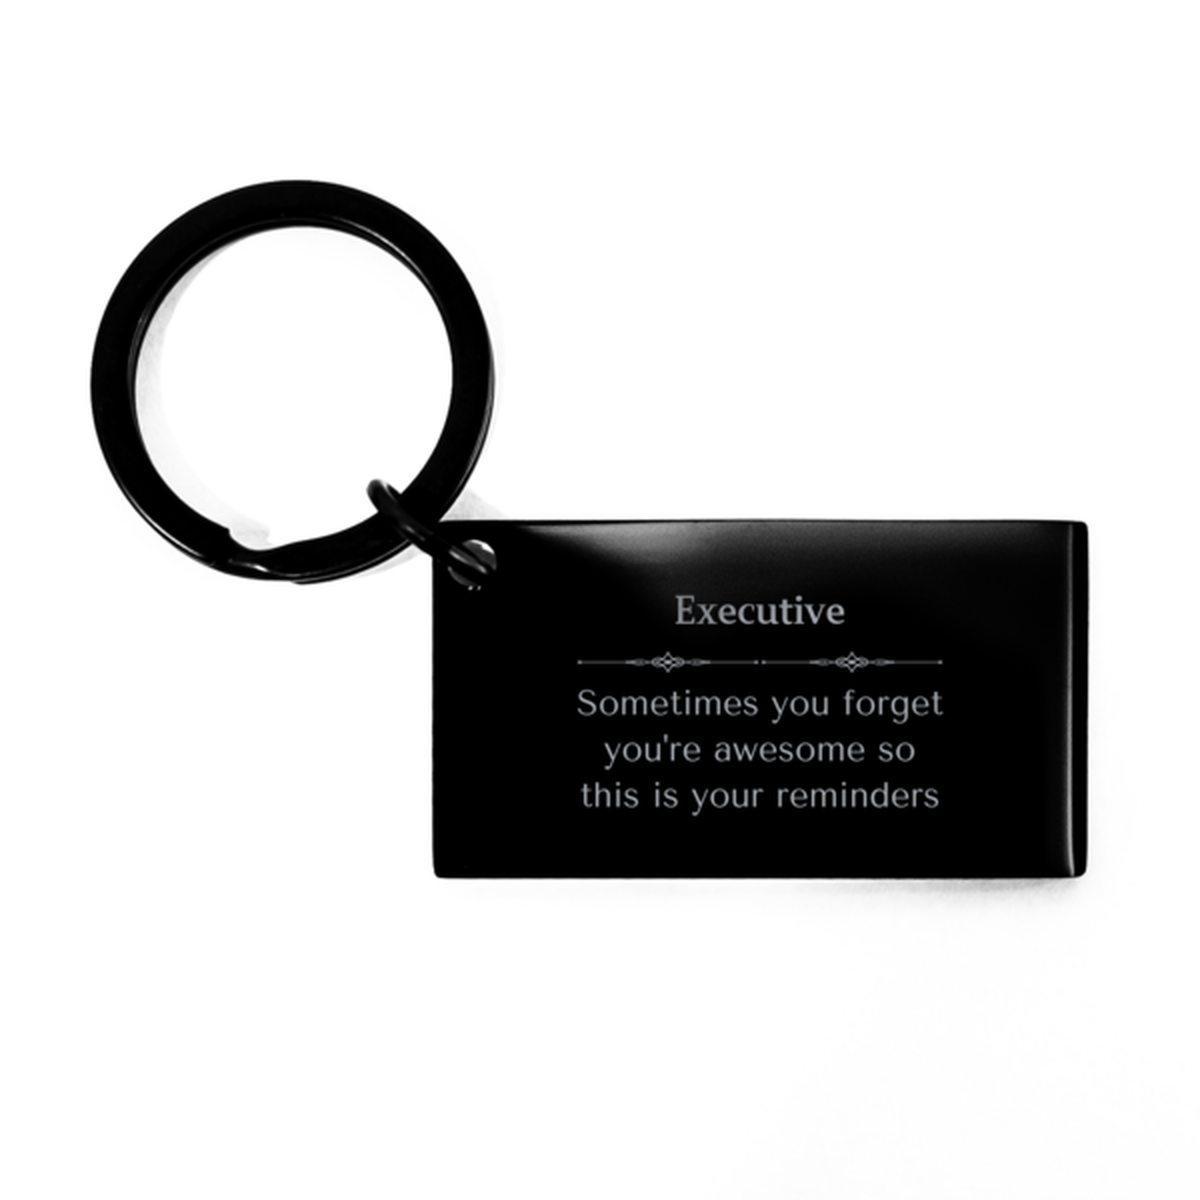 Sentimental Executive Keychain, Jeweler Sometimes you forget you're awesome so this is your reminders, Graduation Christmas Birthday Gifts for Executive, Men, Women, Coworkers